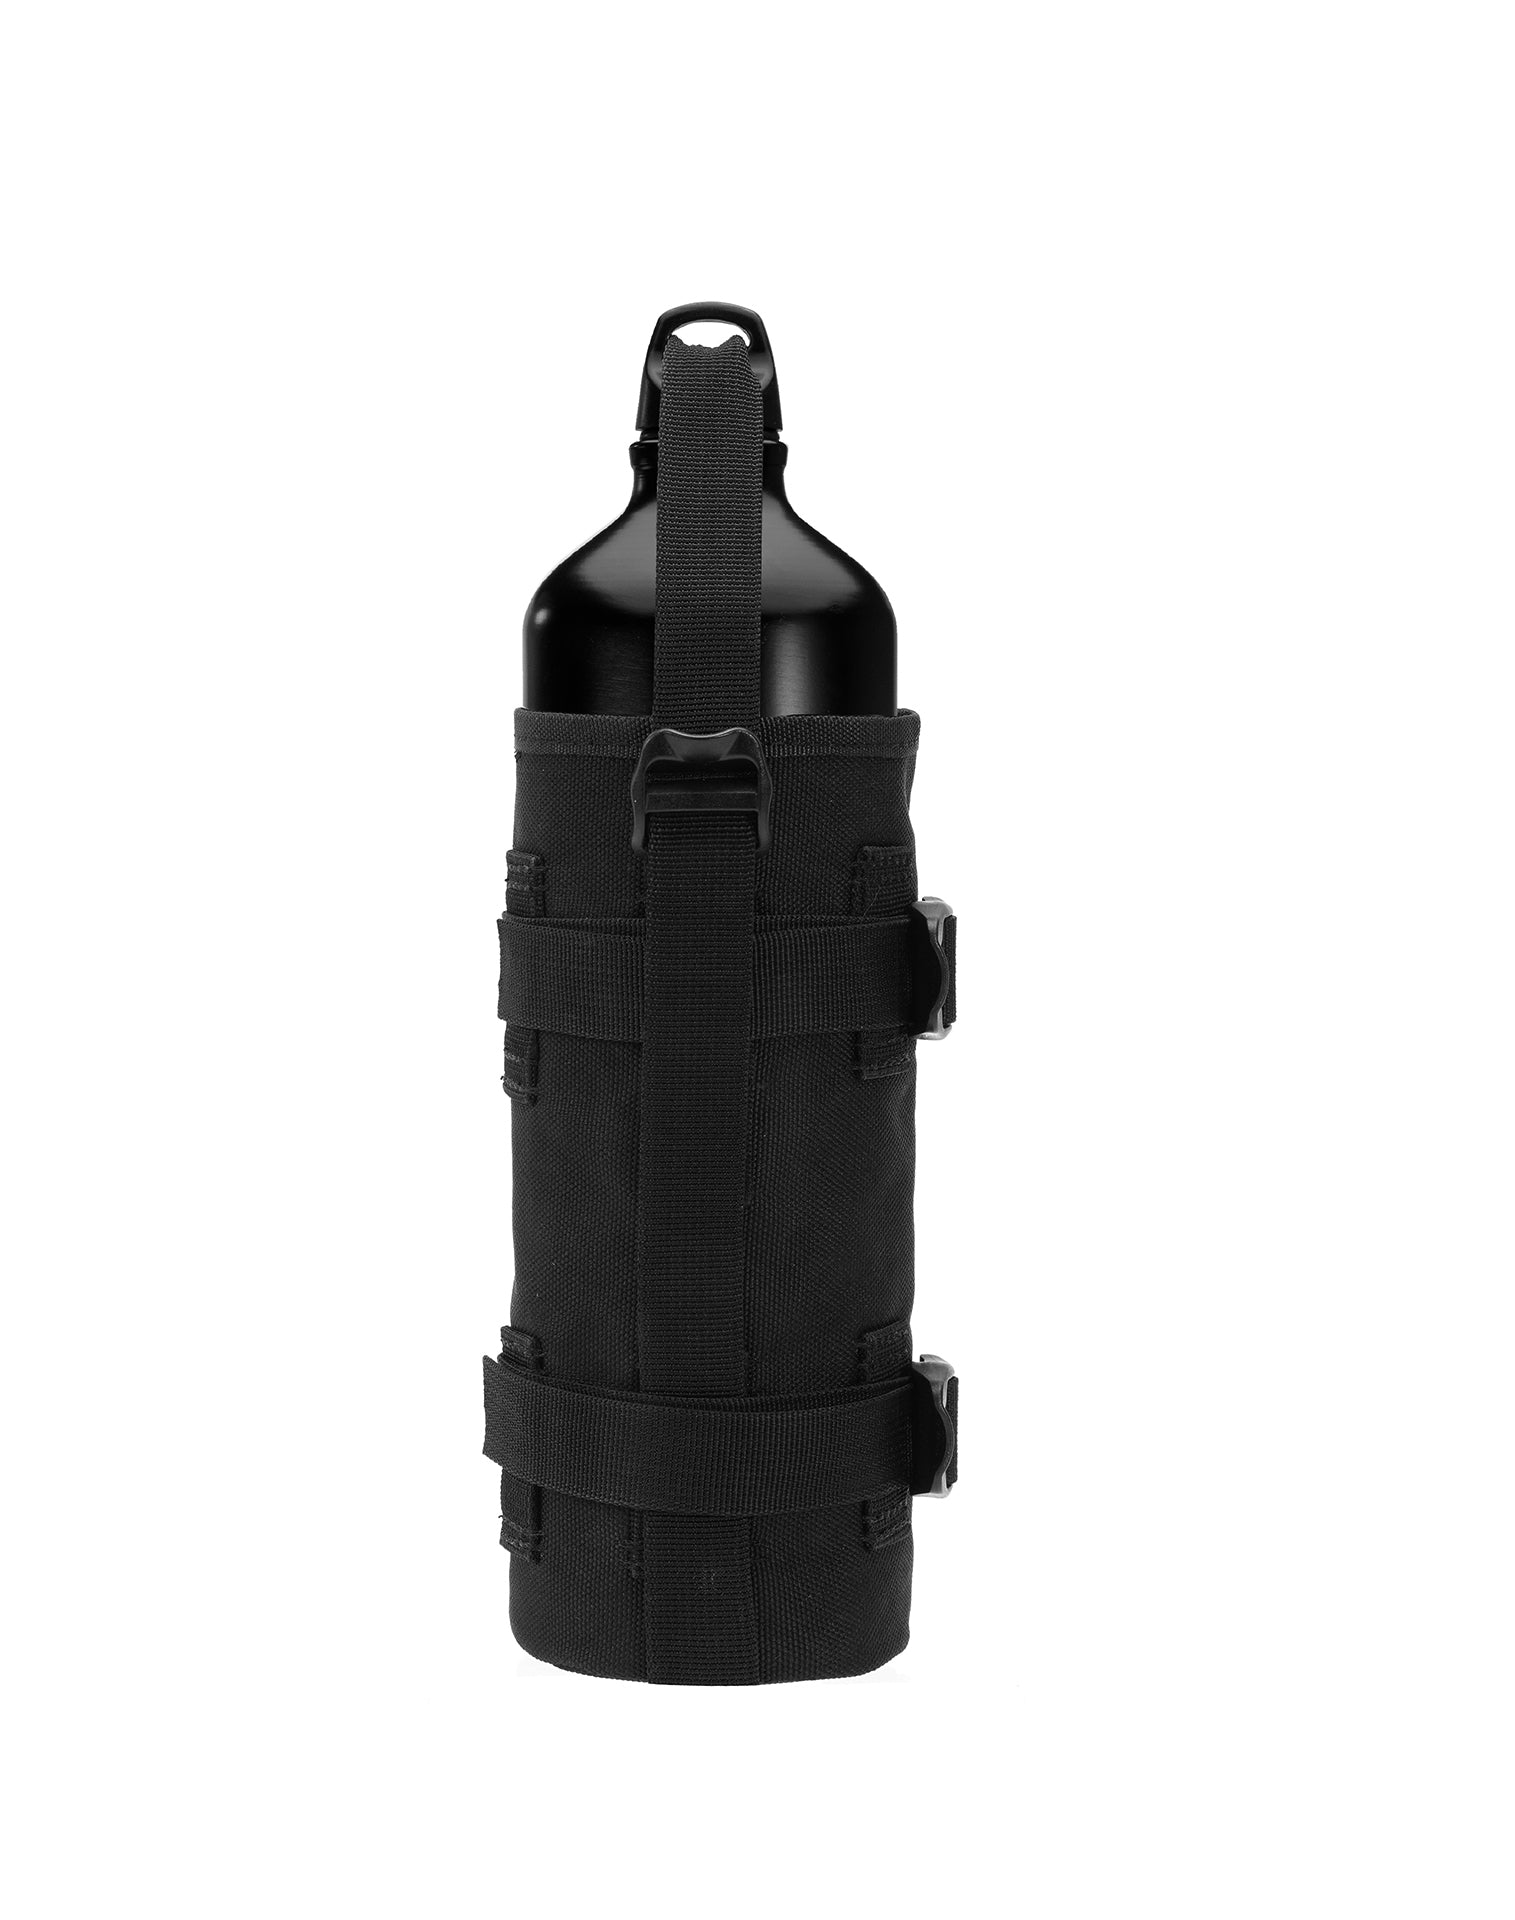 Viking Patriot Motorcycle Fuel Bottle w/Bottle Holster Main view